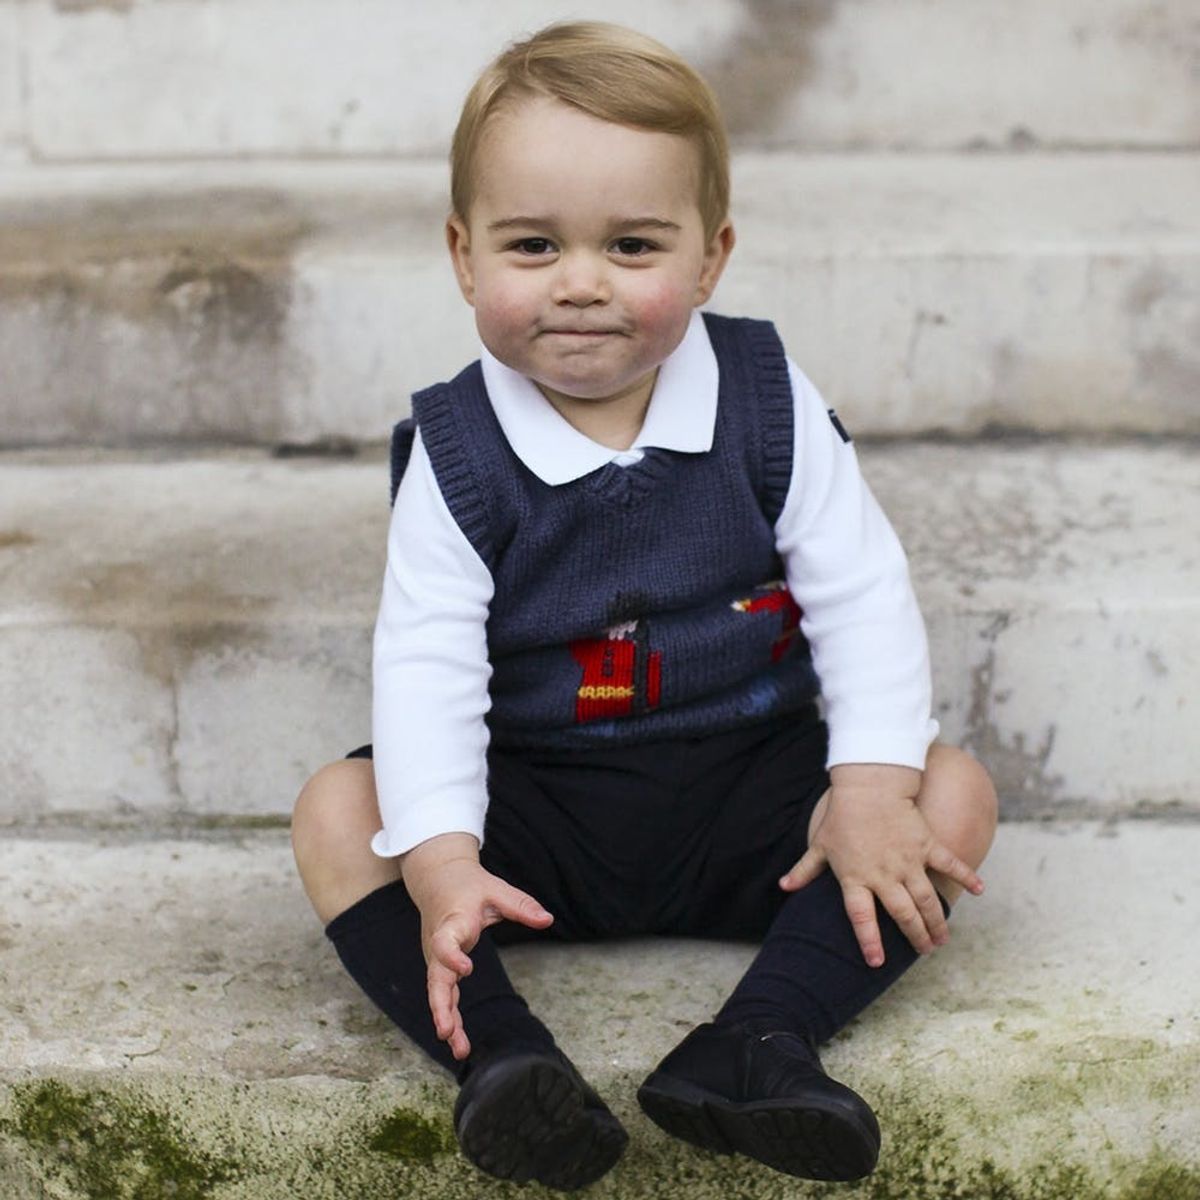 Prince George’s First Day of School Outfit Is *Actually* Too Cute to Handle